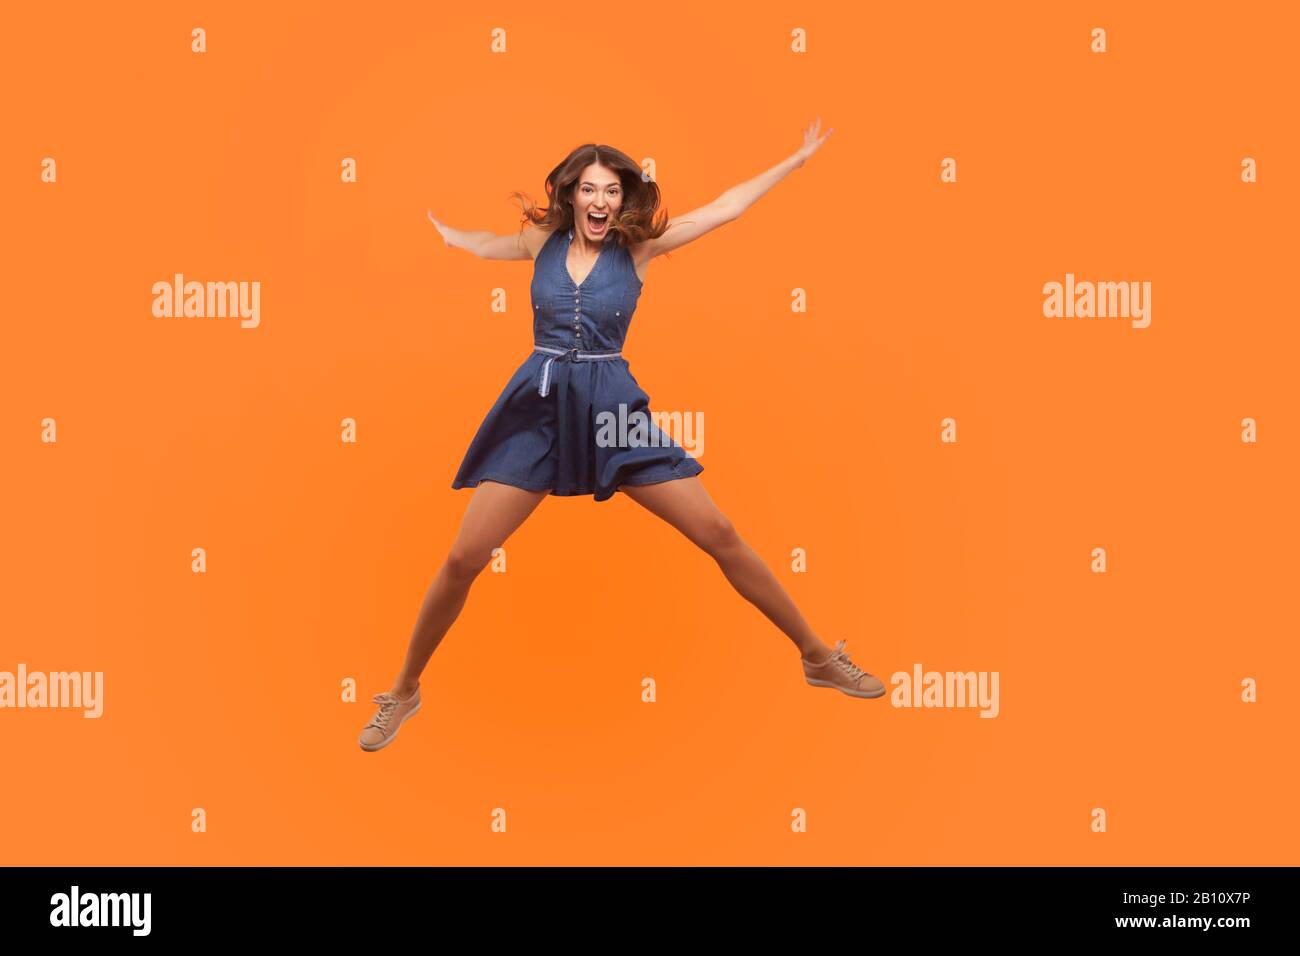 Overjoyed excited ecstatic brunette woman in denim dress jumping up like star and shouting from enthusiasm, flying isolated on orange background, full Stock Photo